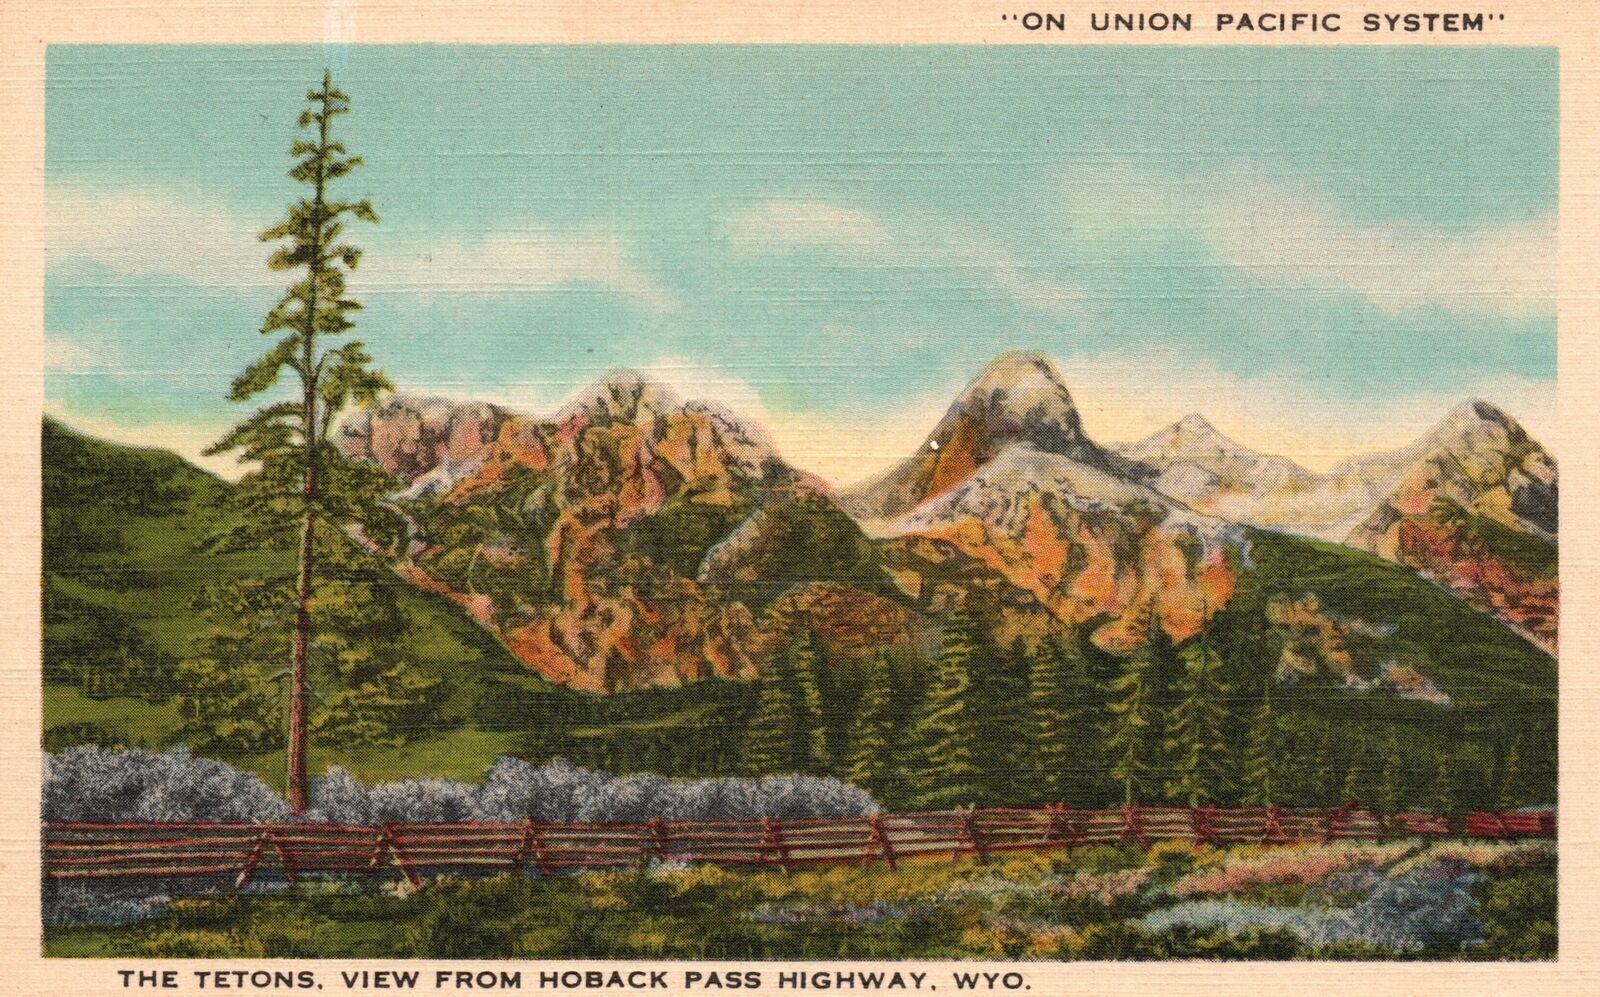 Vintage Postcard The Tetons View From Hoback Pass Highway Wyoming Union Pacific